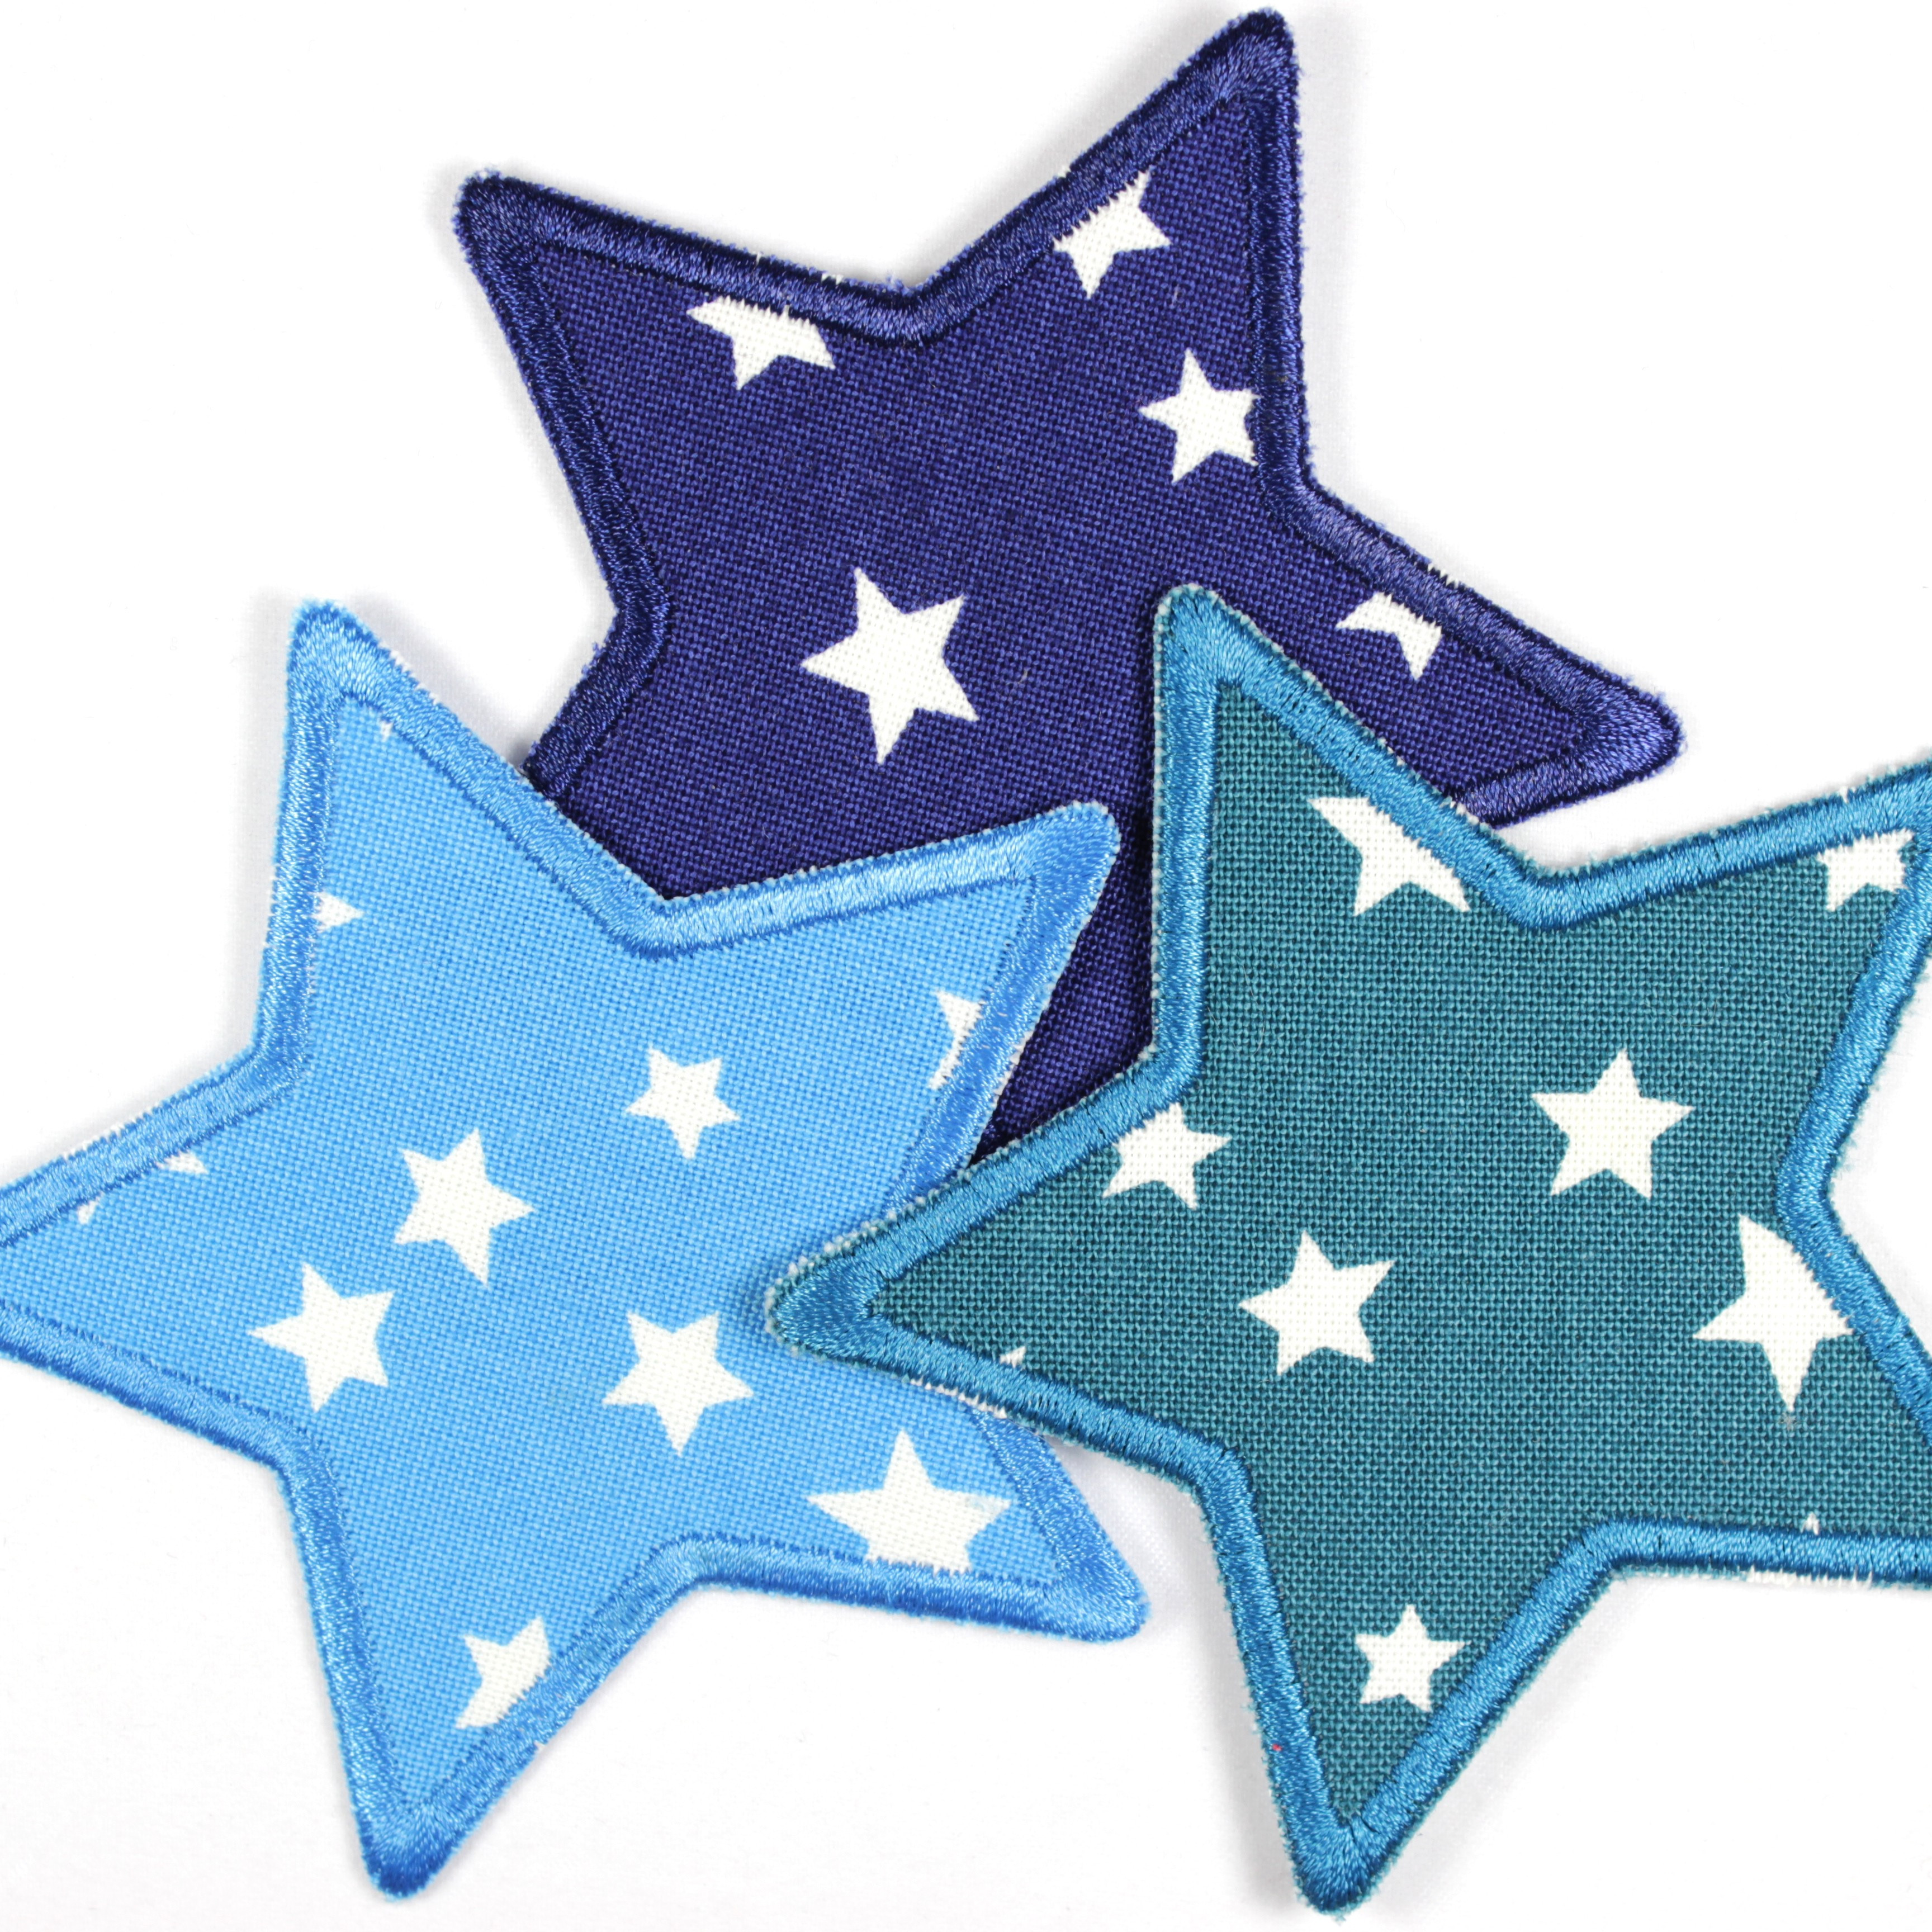 Flickli - the patch! Jeans star with starlets on blue